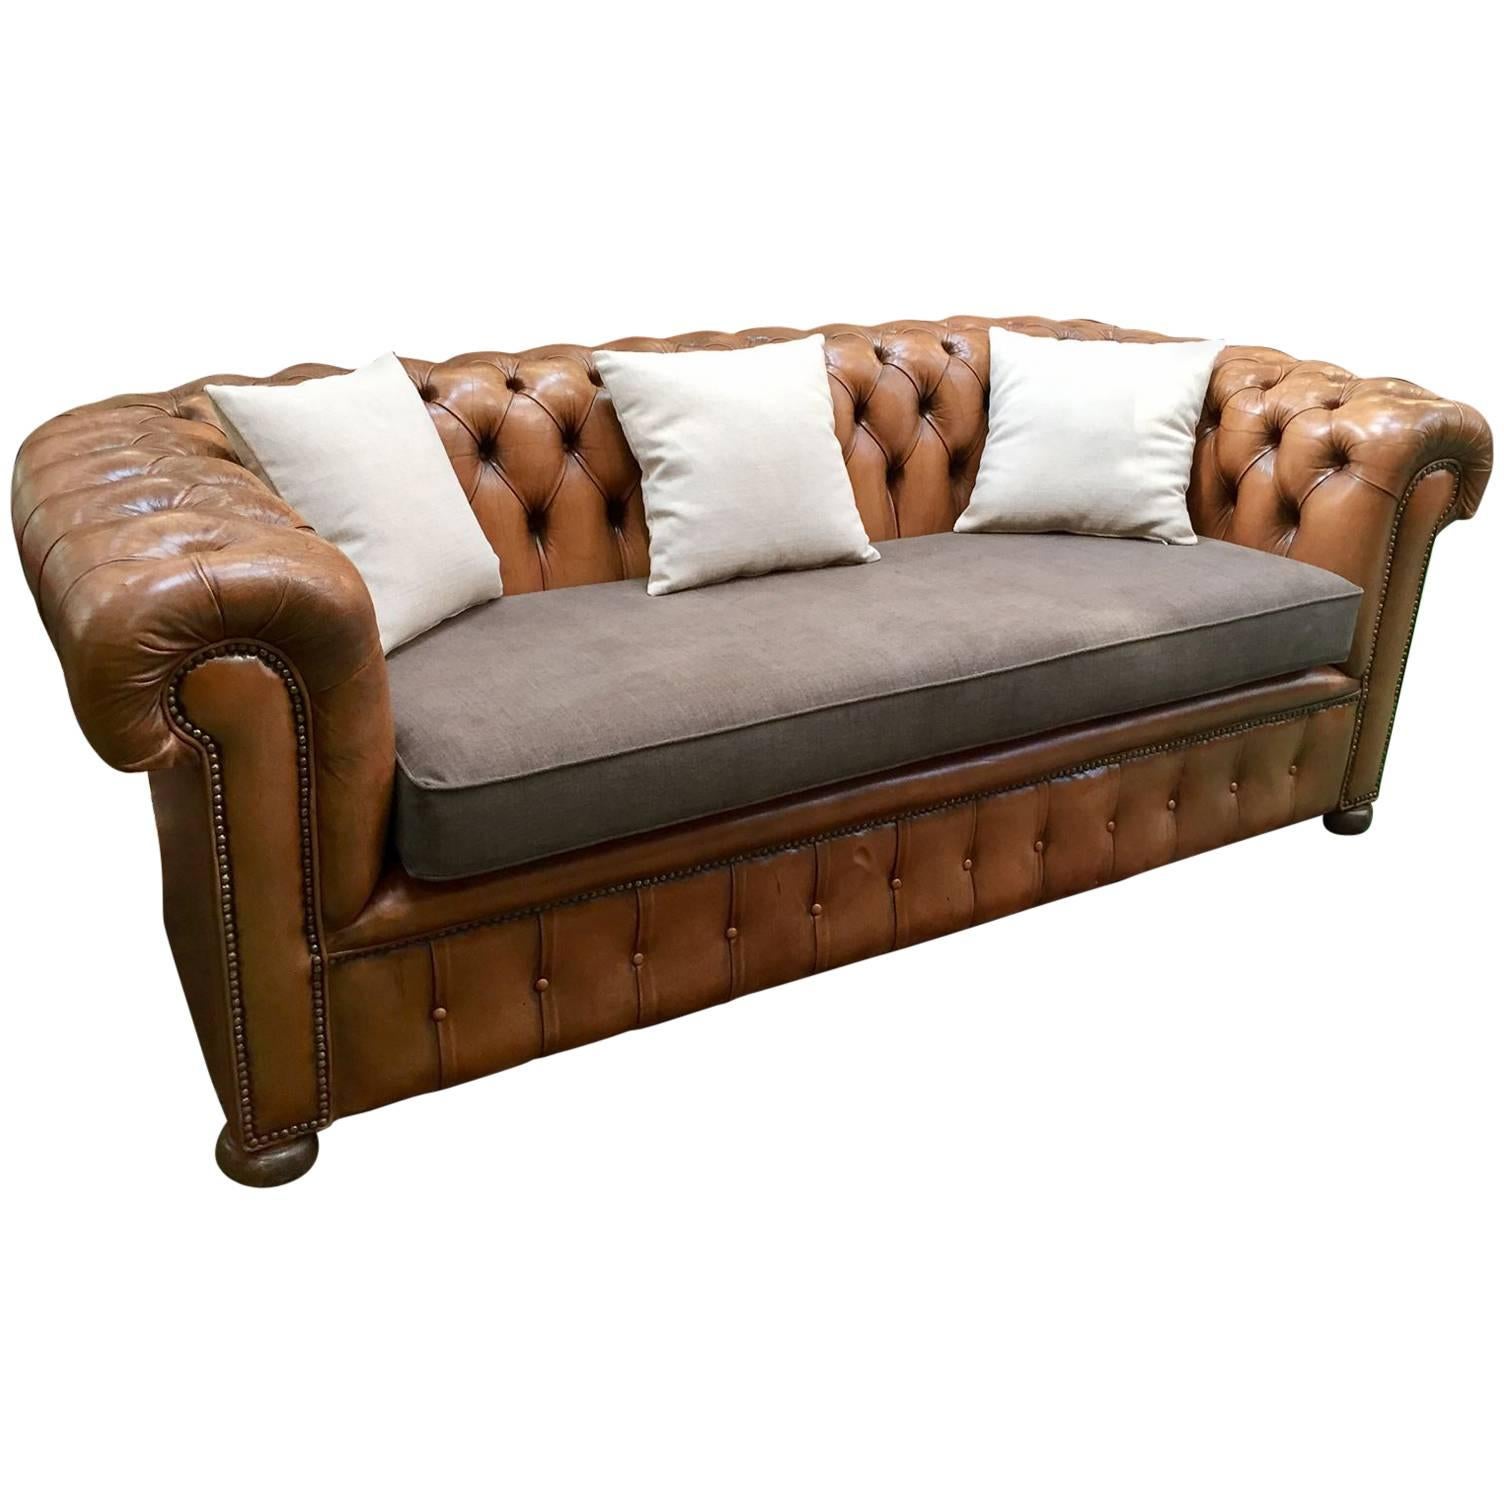 1960s Chesterfield Leather and Tissu Sofa/Canape